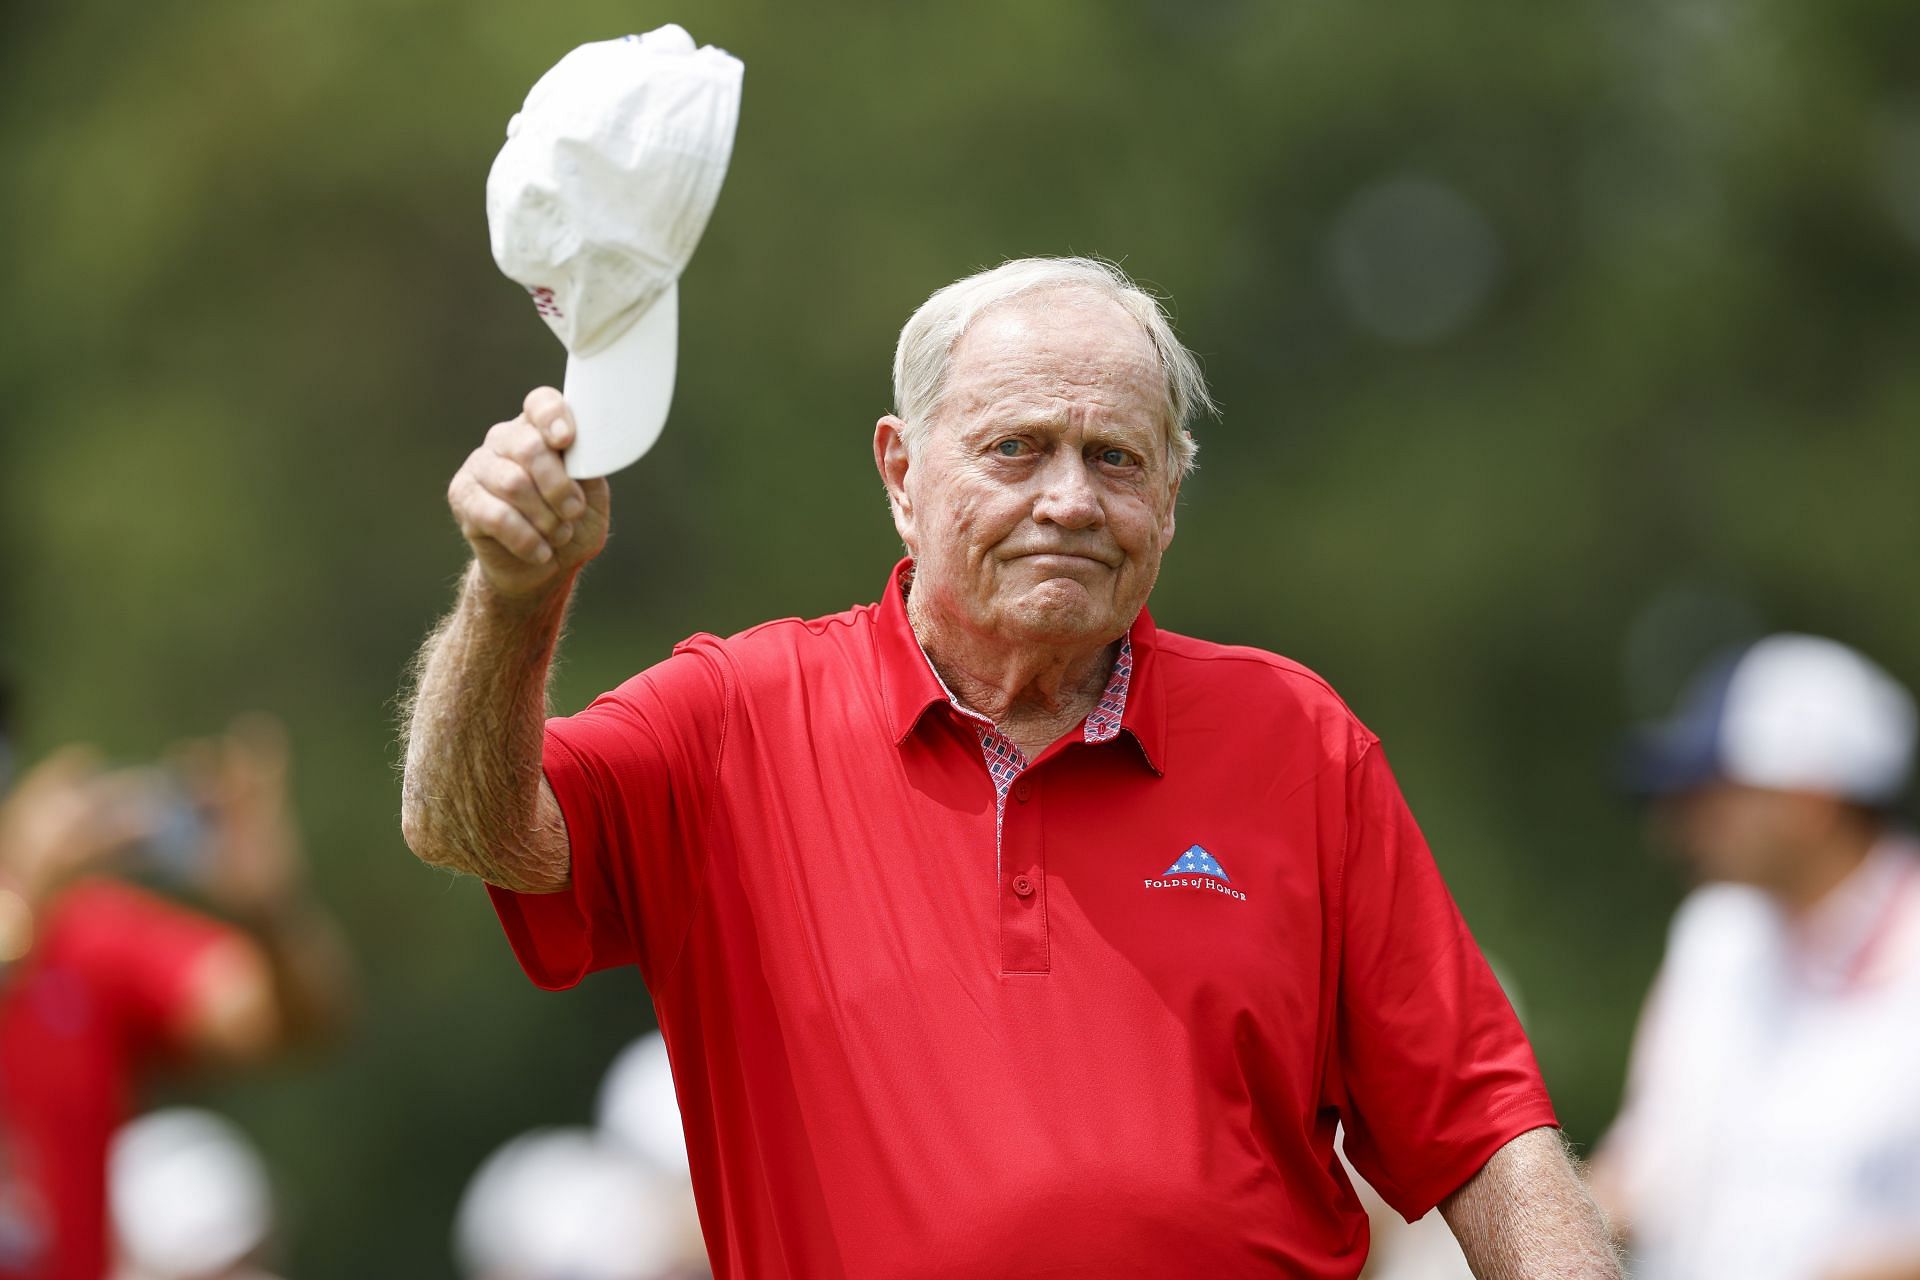 Jack Nicklaus during the Insperity Invitational